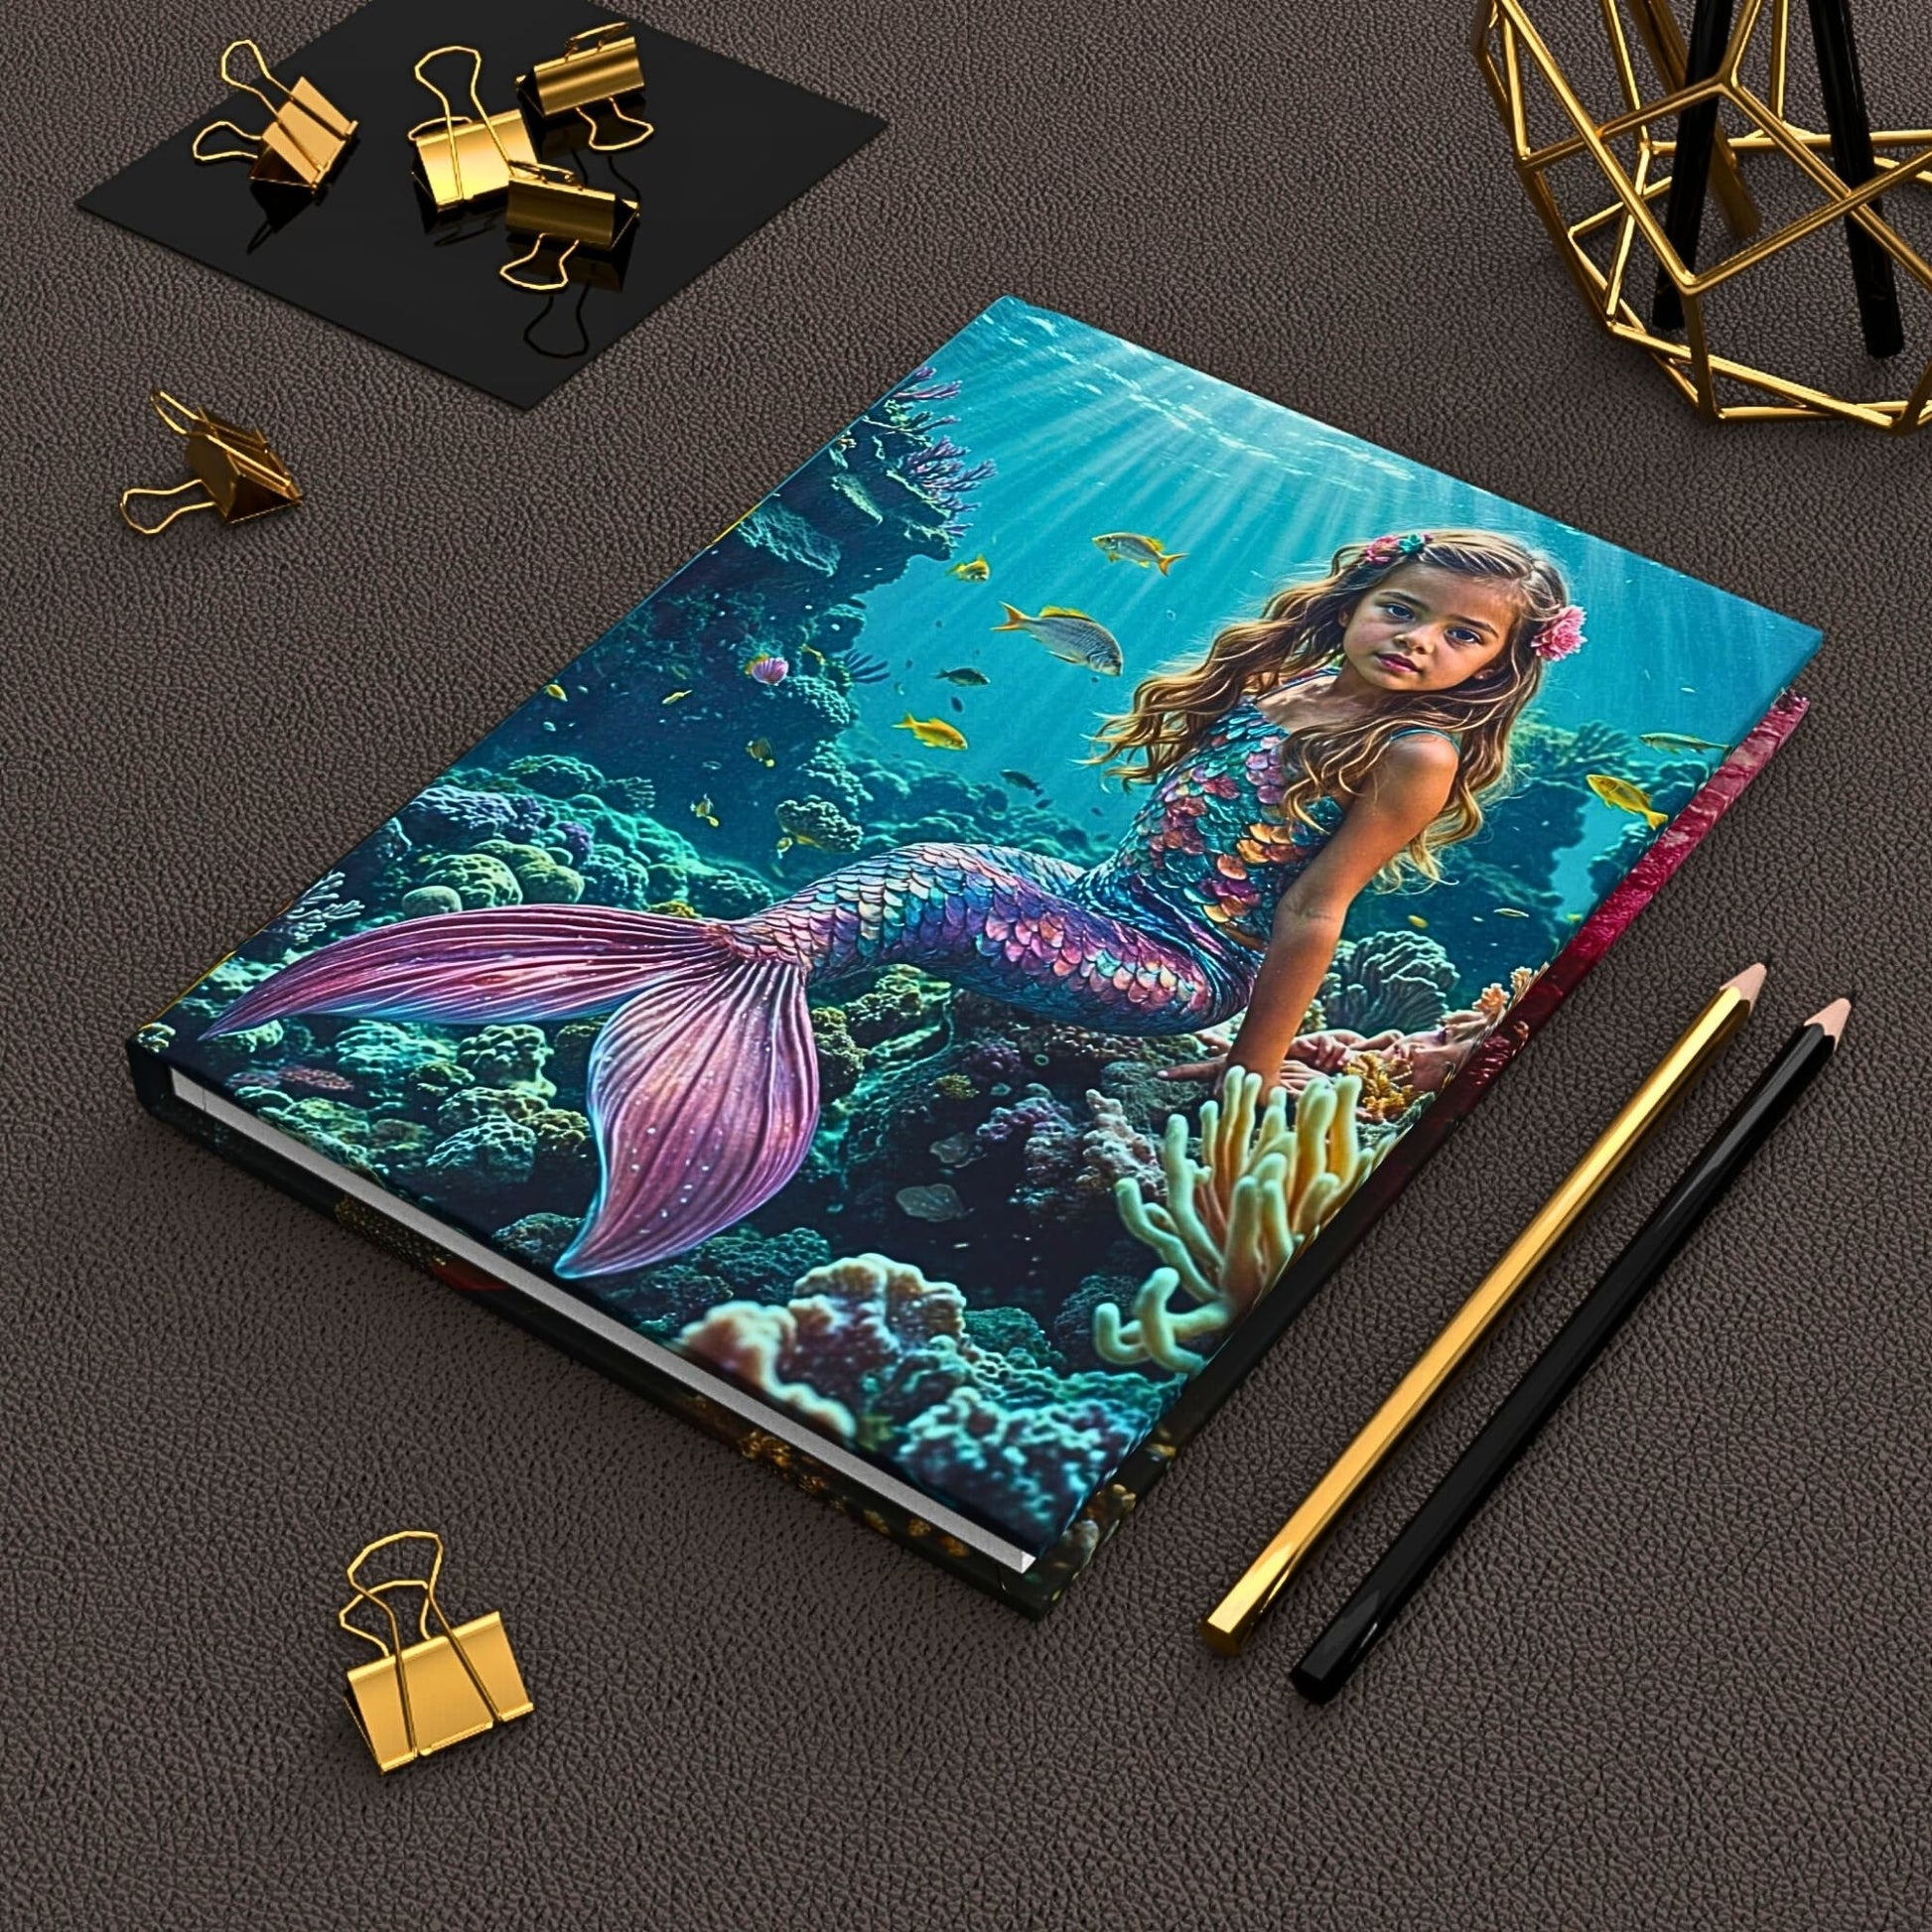 Celebrate her imagination with a Custom Mermaid Journal, personalized from her cherished photo. This unique gift for girls is ideal for birthdays, providing a magical way to record mermaid-inspired dreams and adventures.